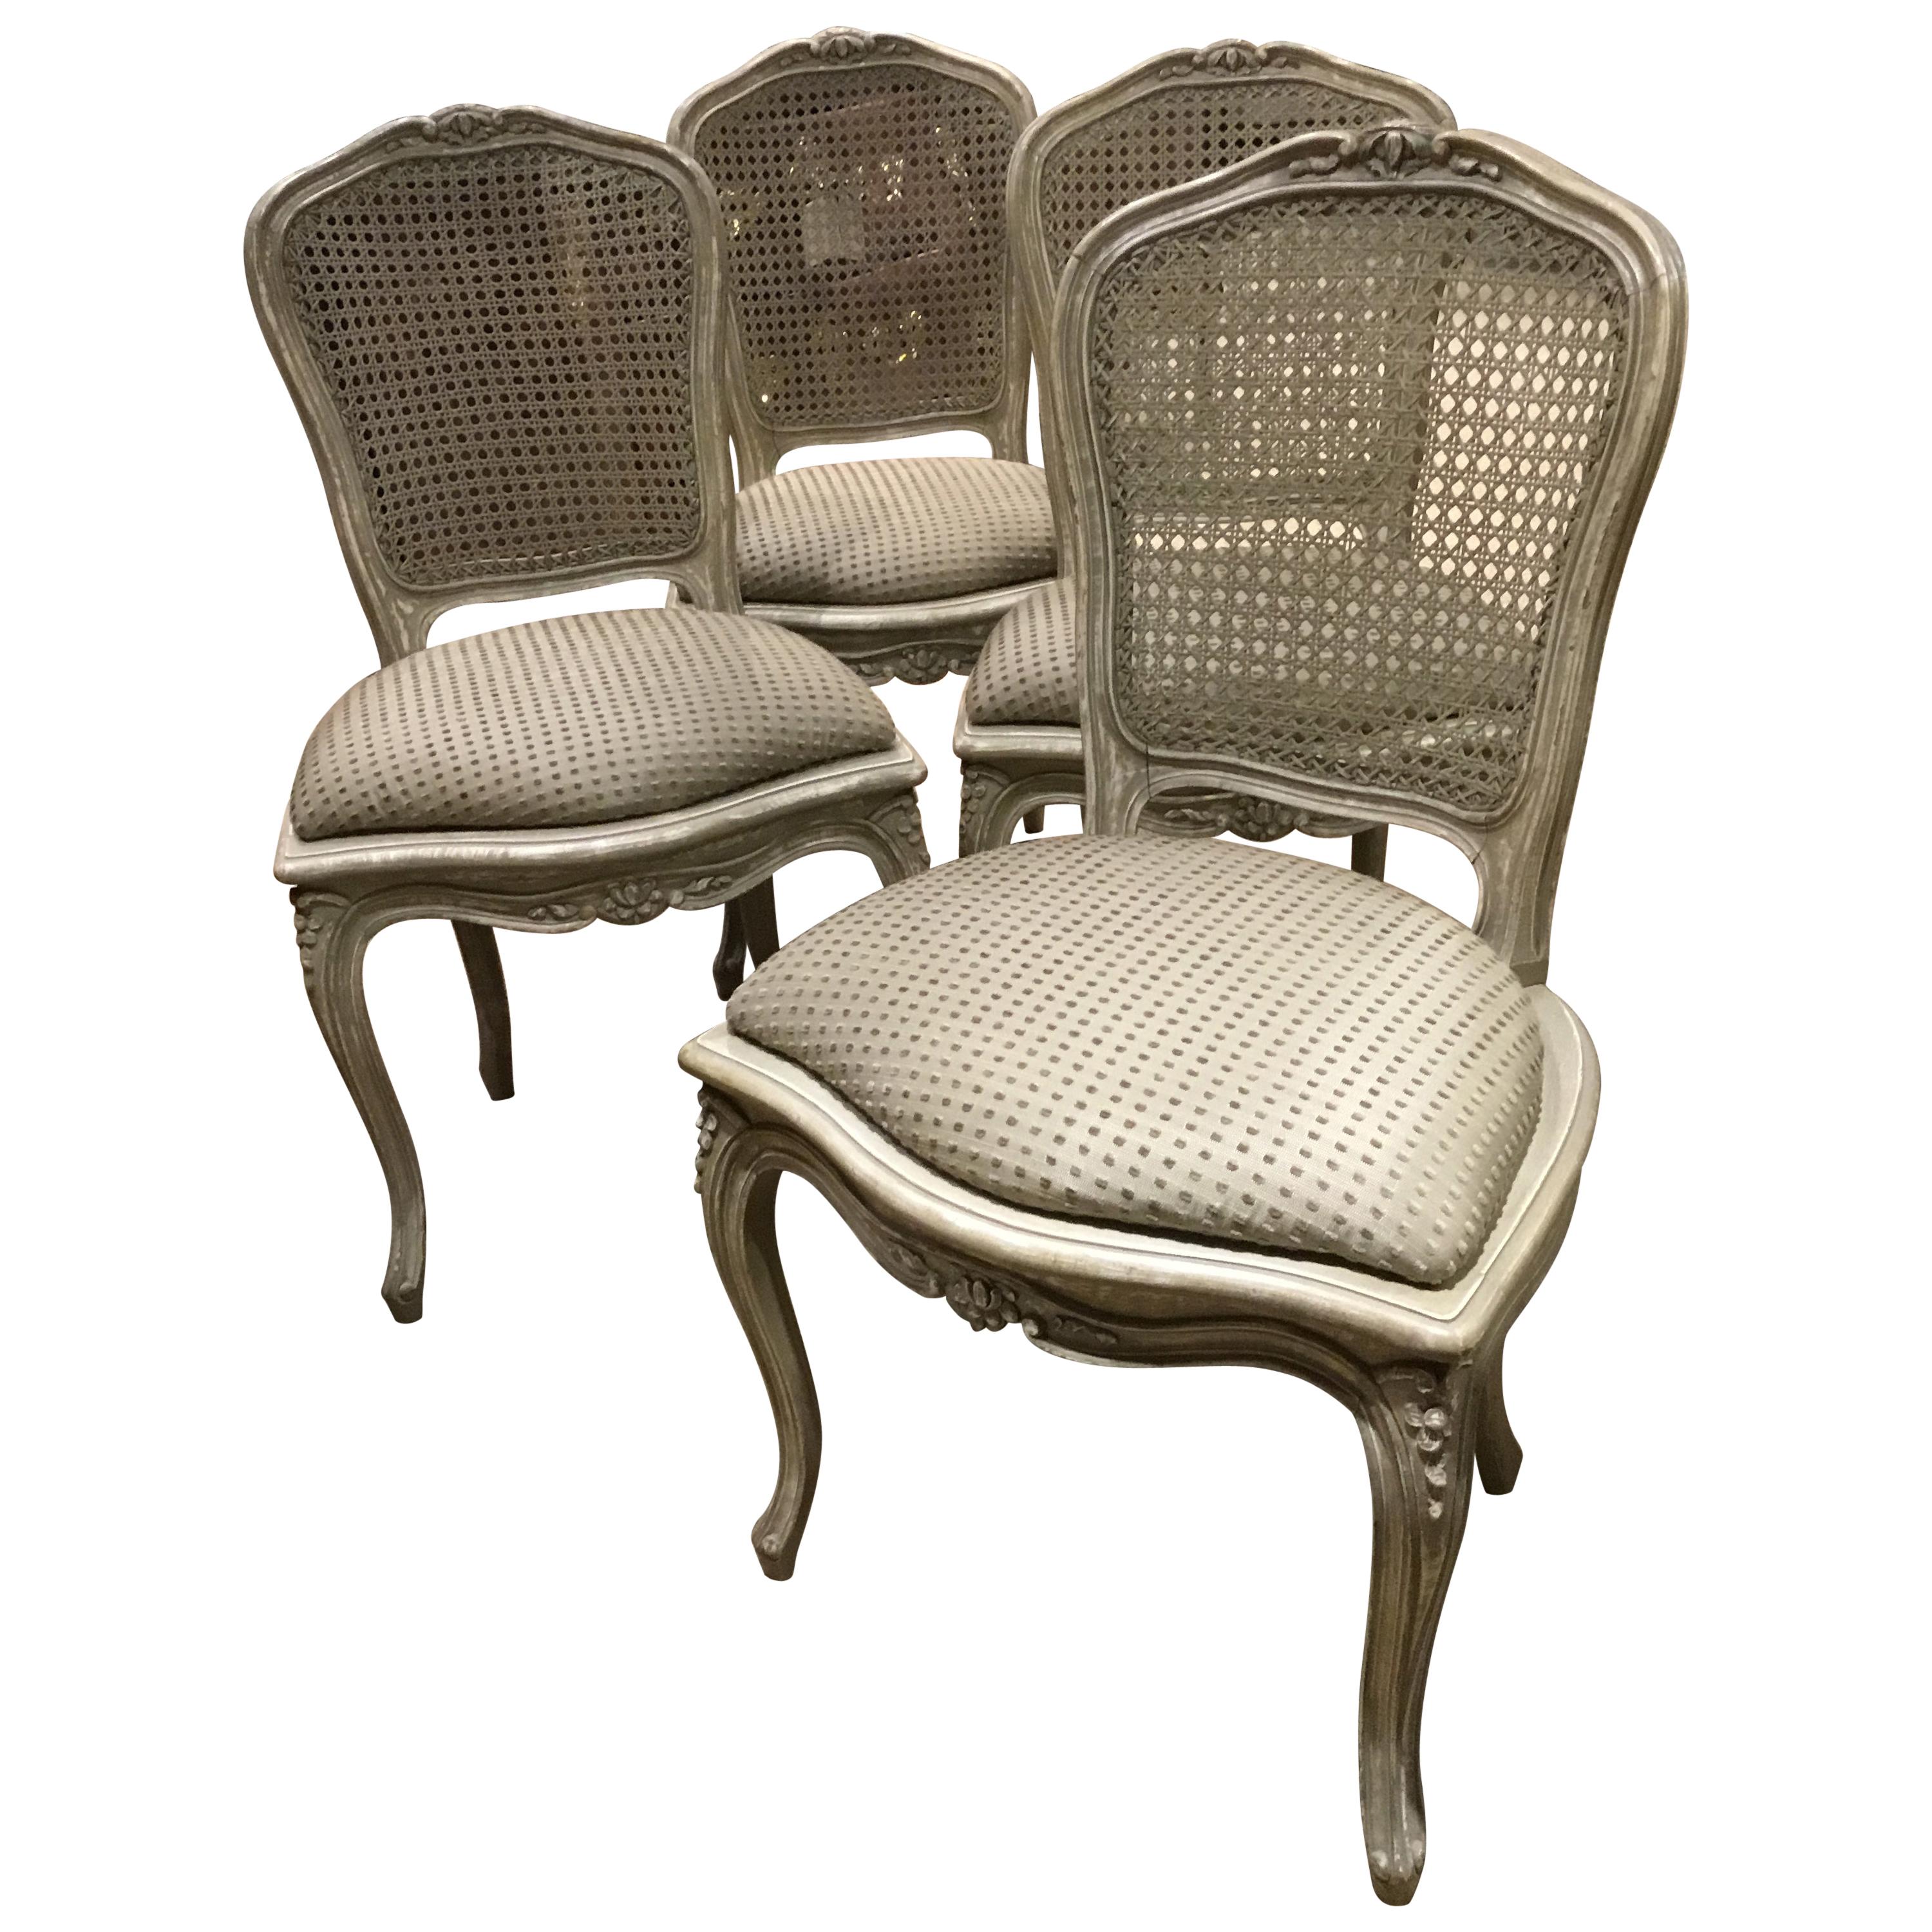 Set of Four Louis XV Style Painted Chairs with Cane Back in Gray/White Hue